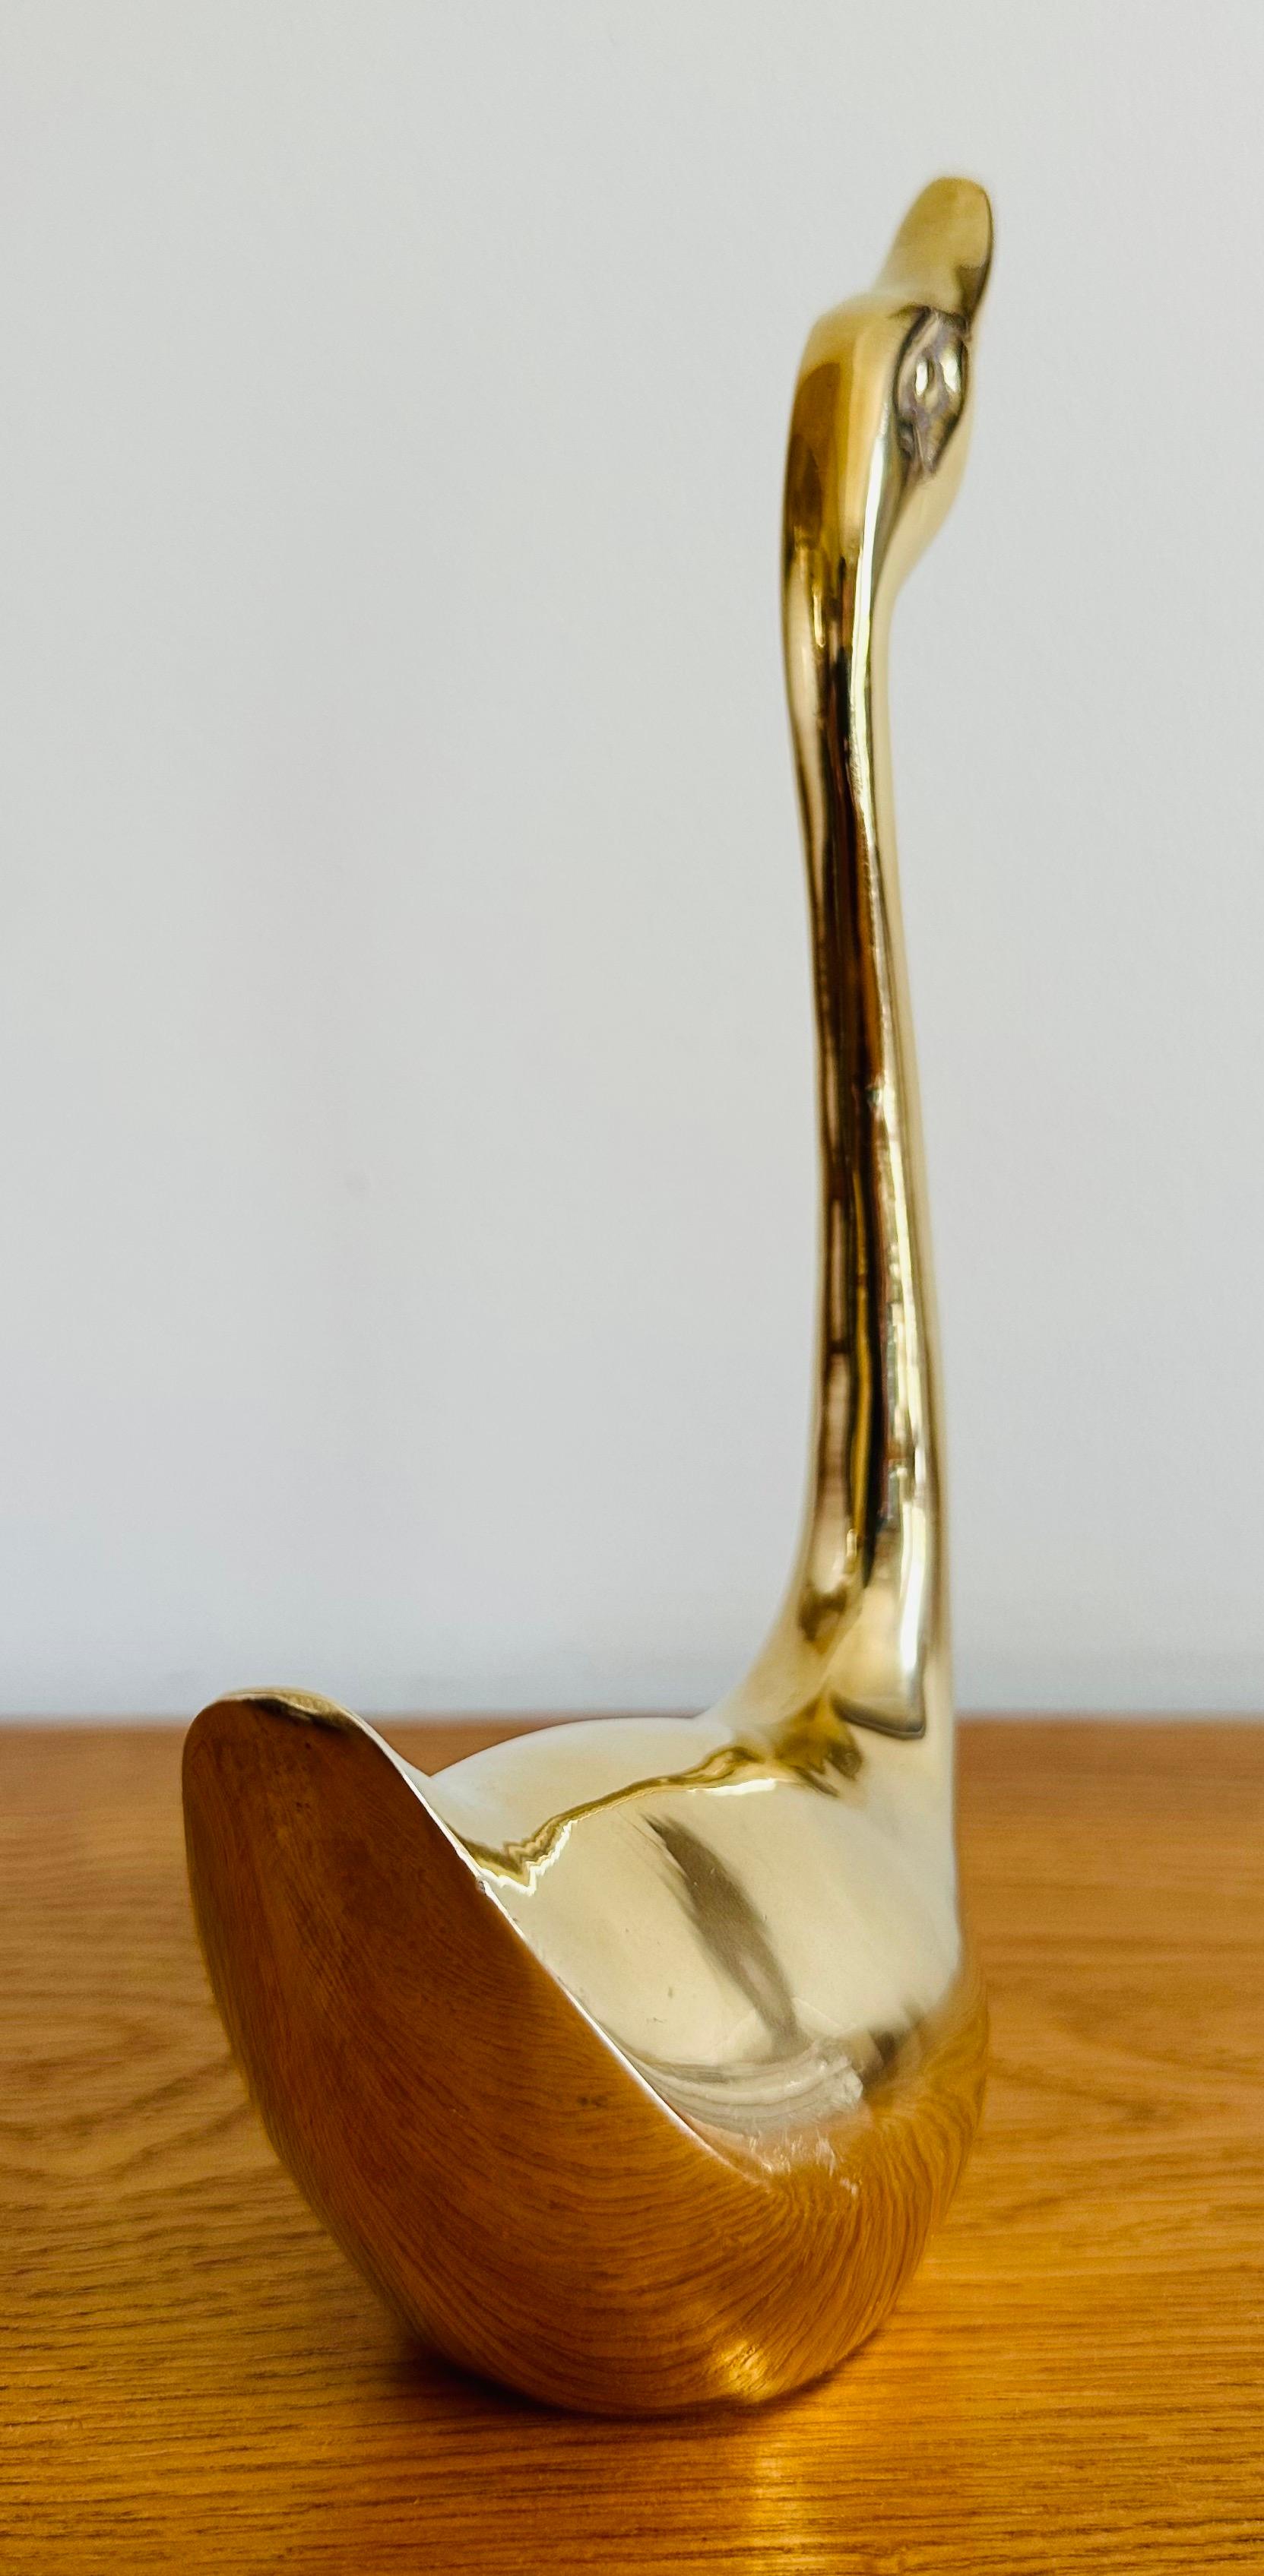 Vintage 1970s French Polished Brass Elegant Decorative Swan Paperweight 4